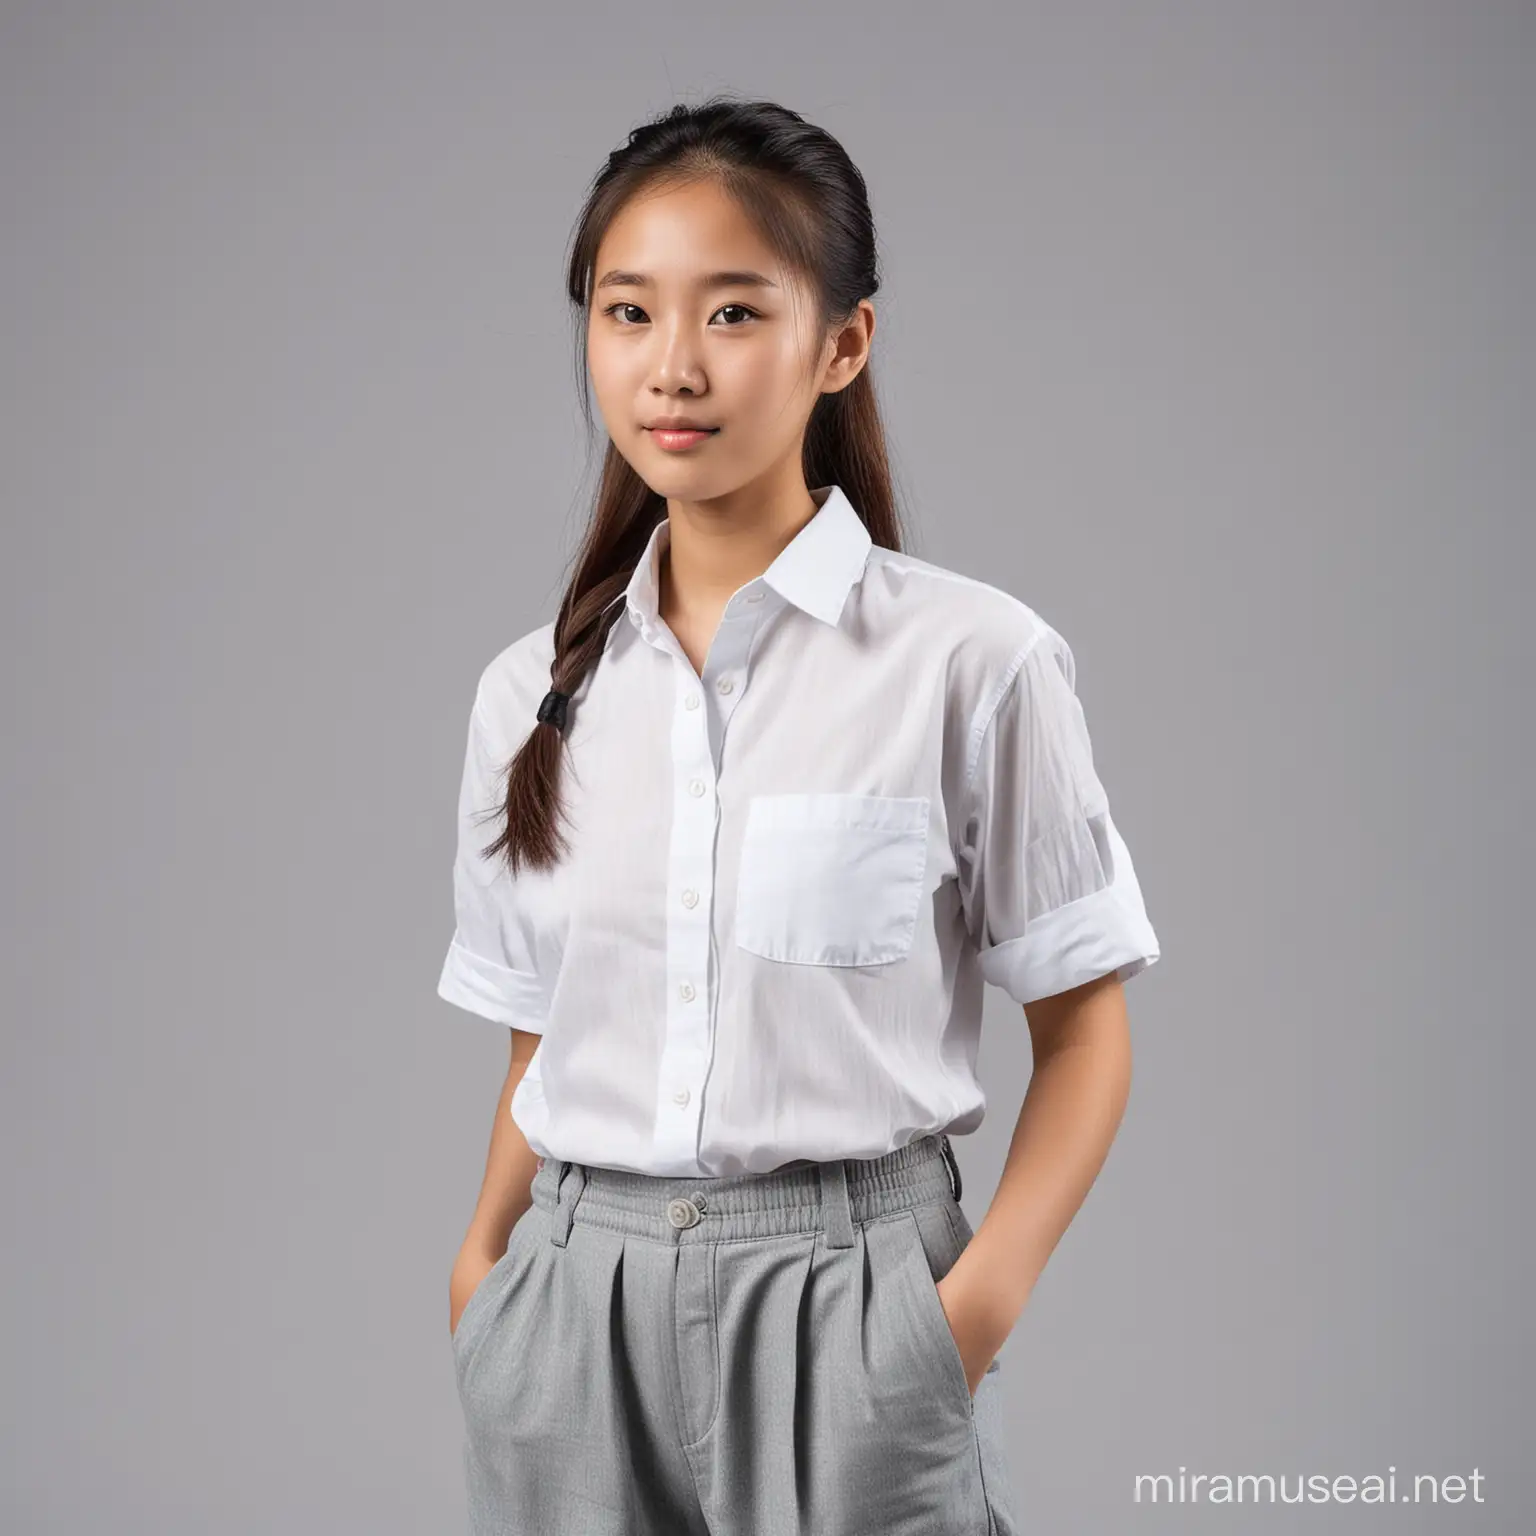 A full portrait of young Asian girl with ponytail, wearing shirts and long pants